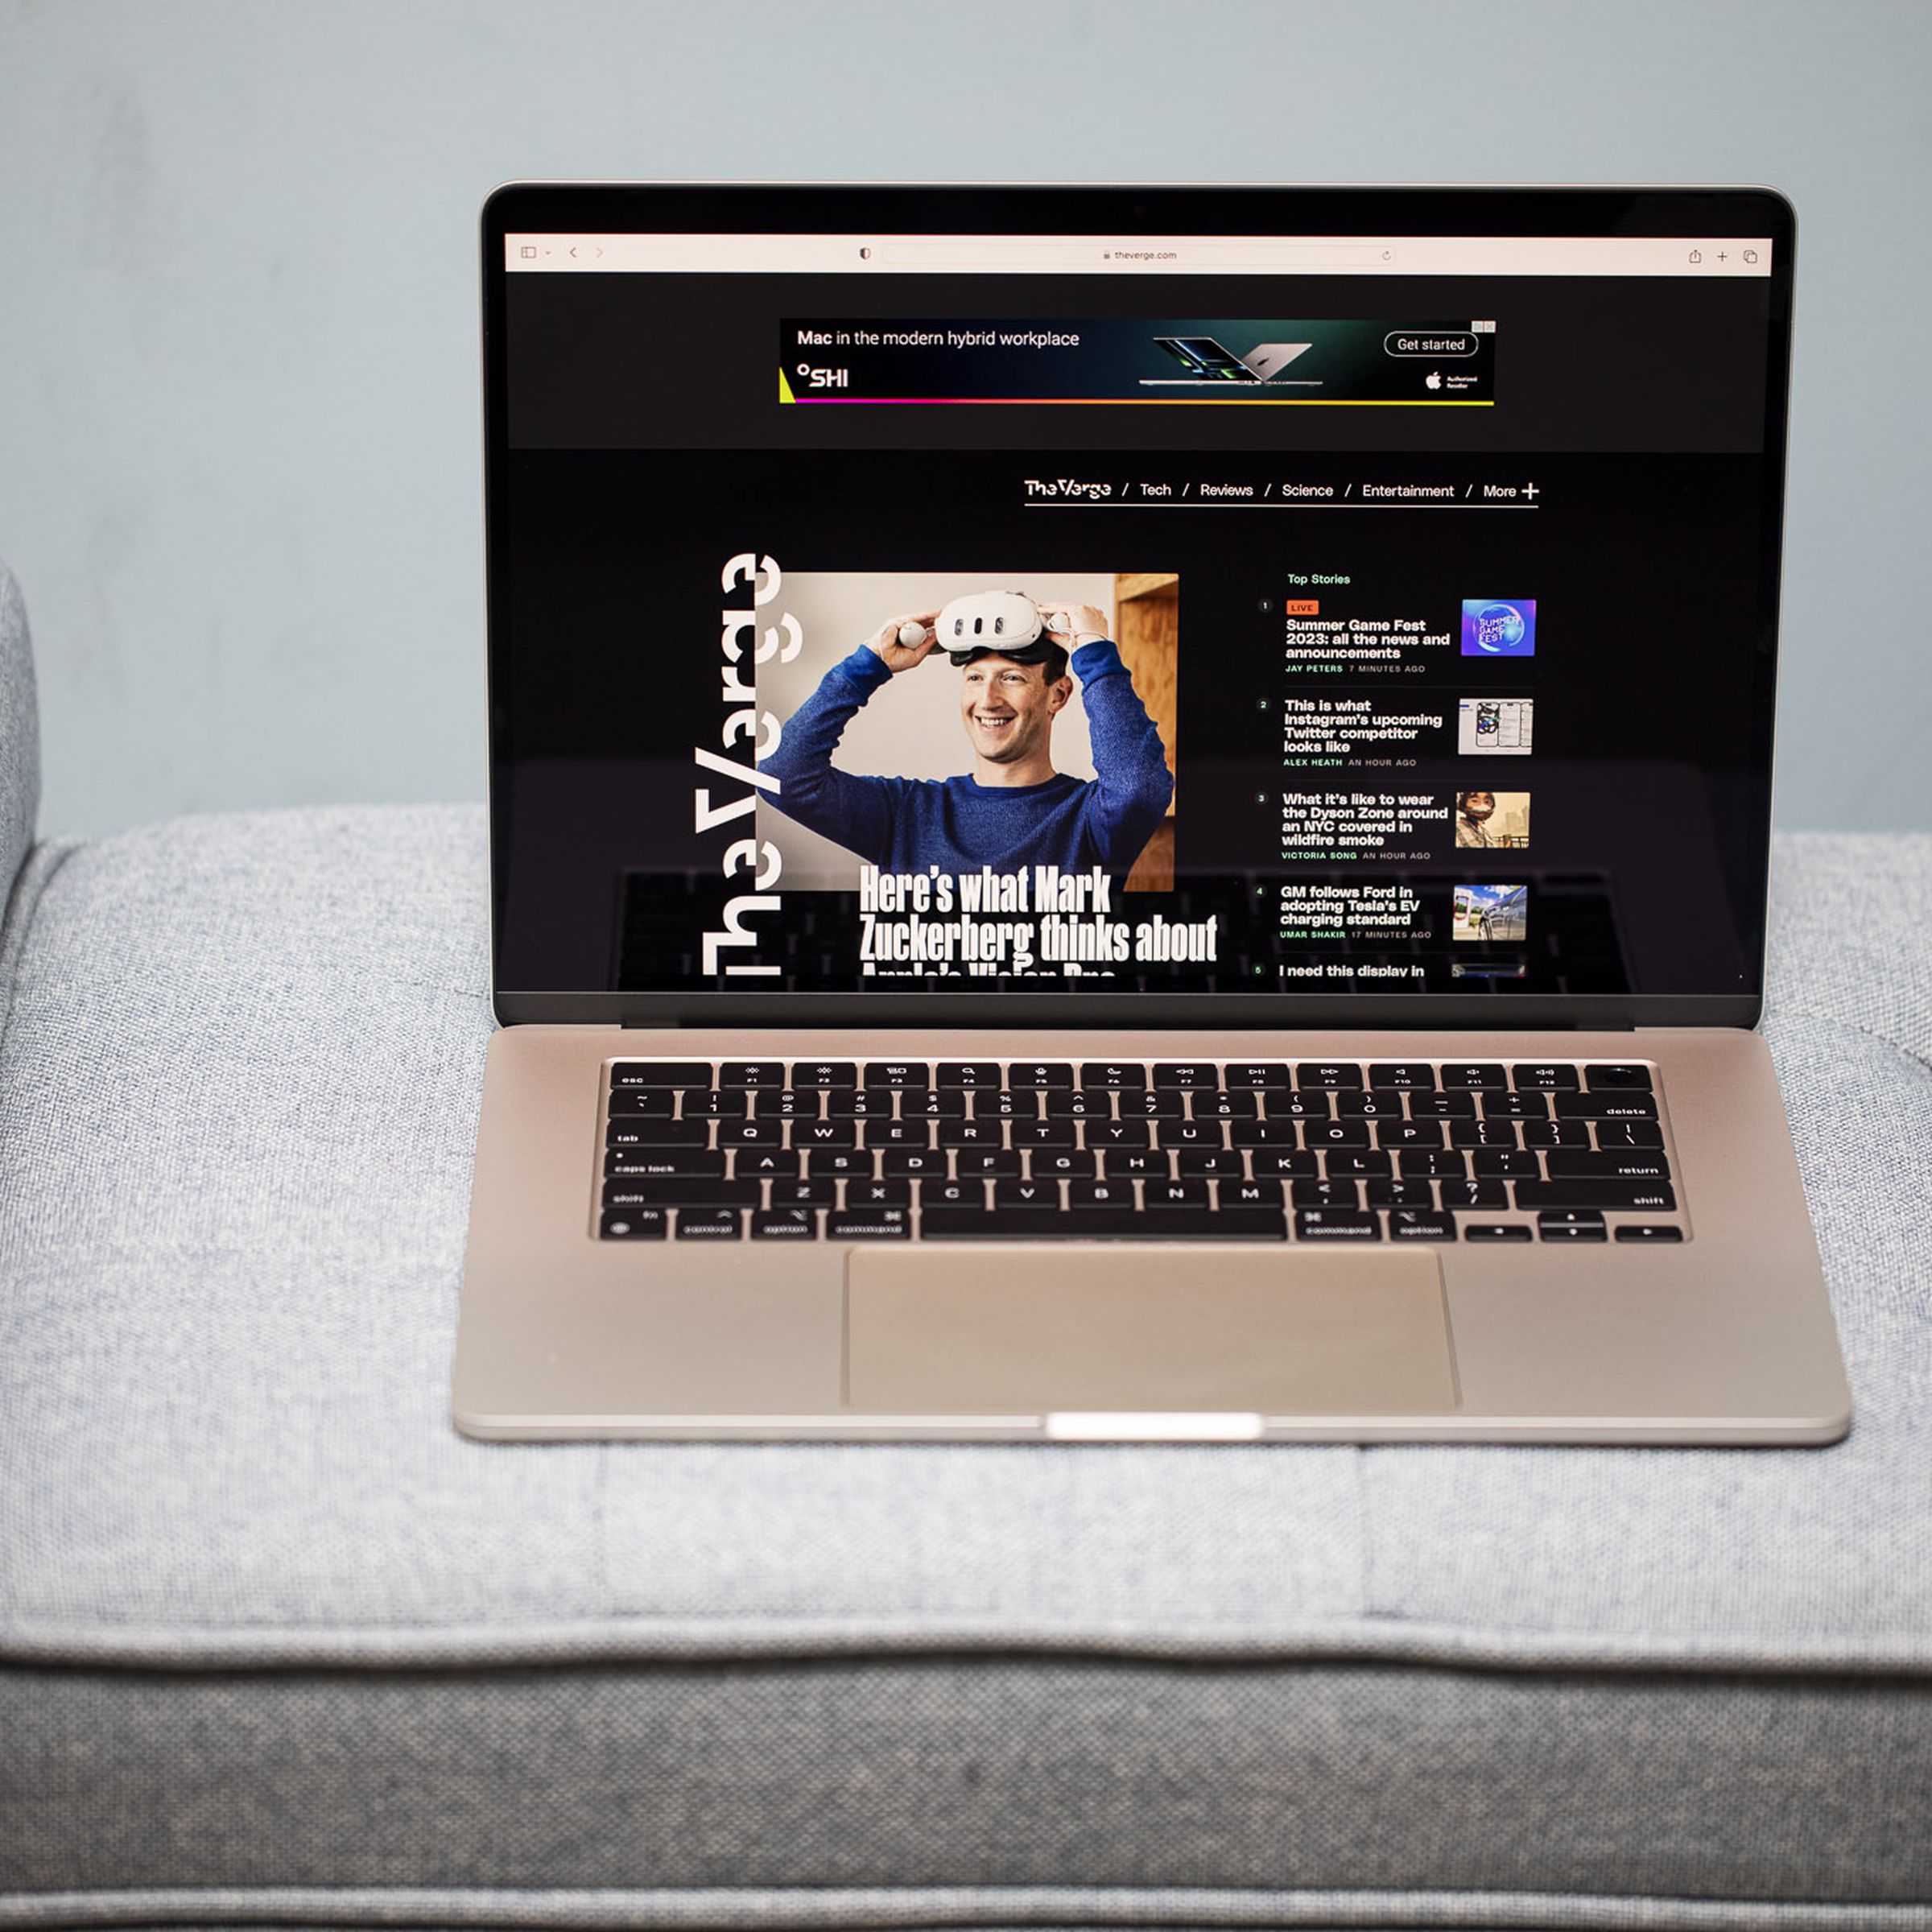 A 15-inch MacBook Air open on a gray couch.